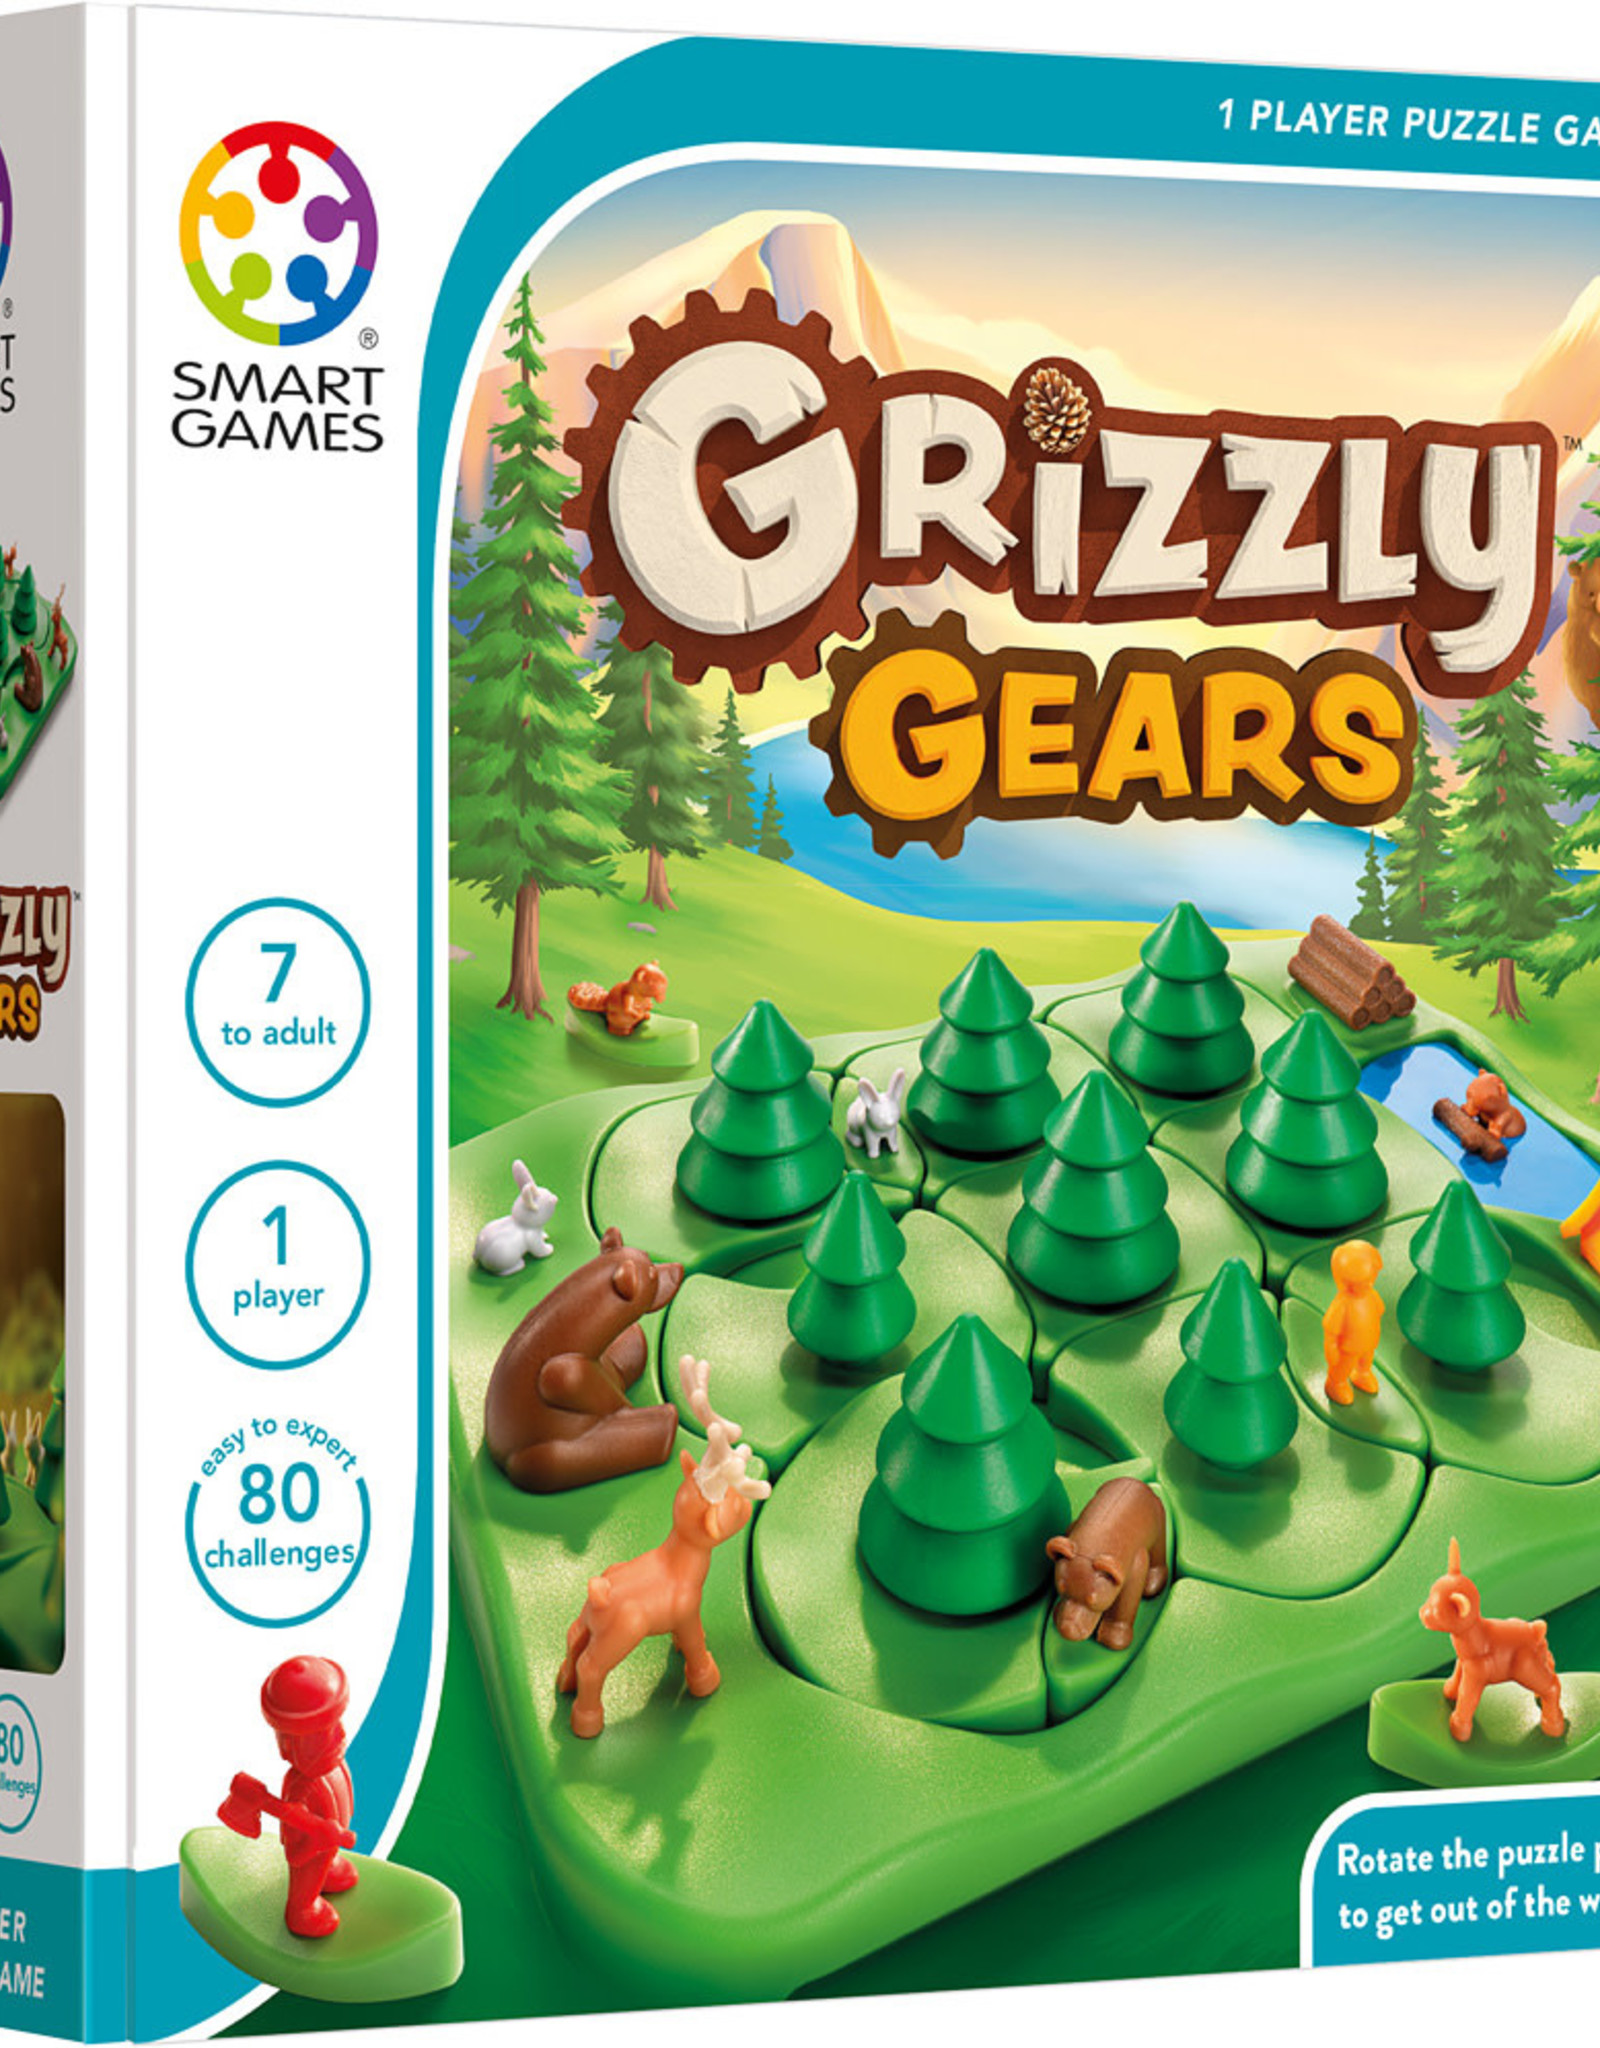 SMART TOYS AND GAMES GRIZZLY GEARS PUZZLE GAME